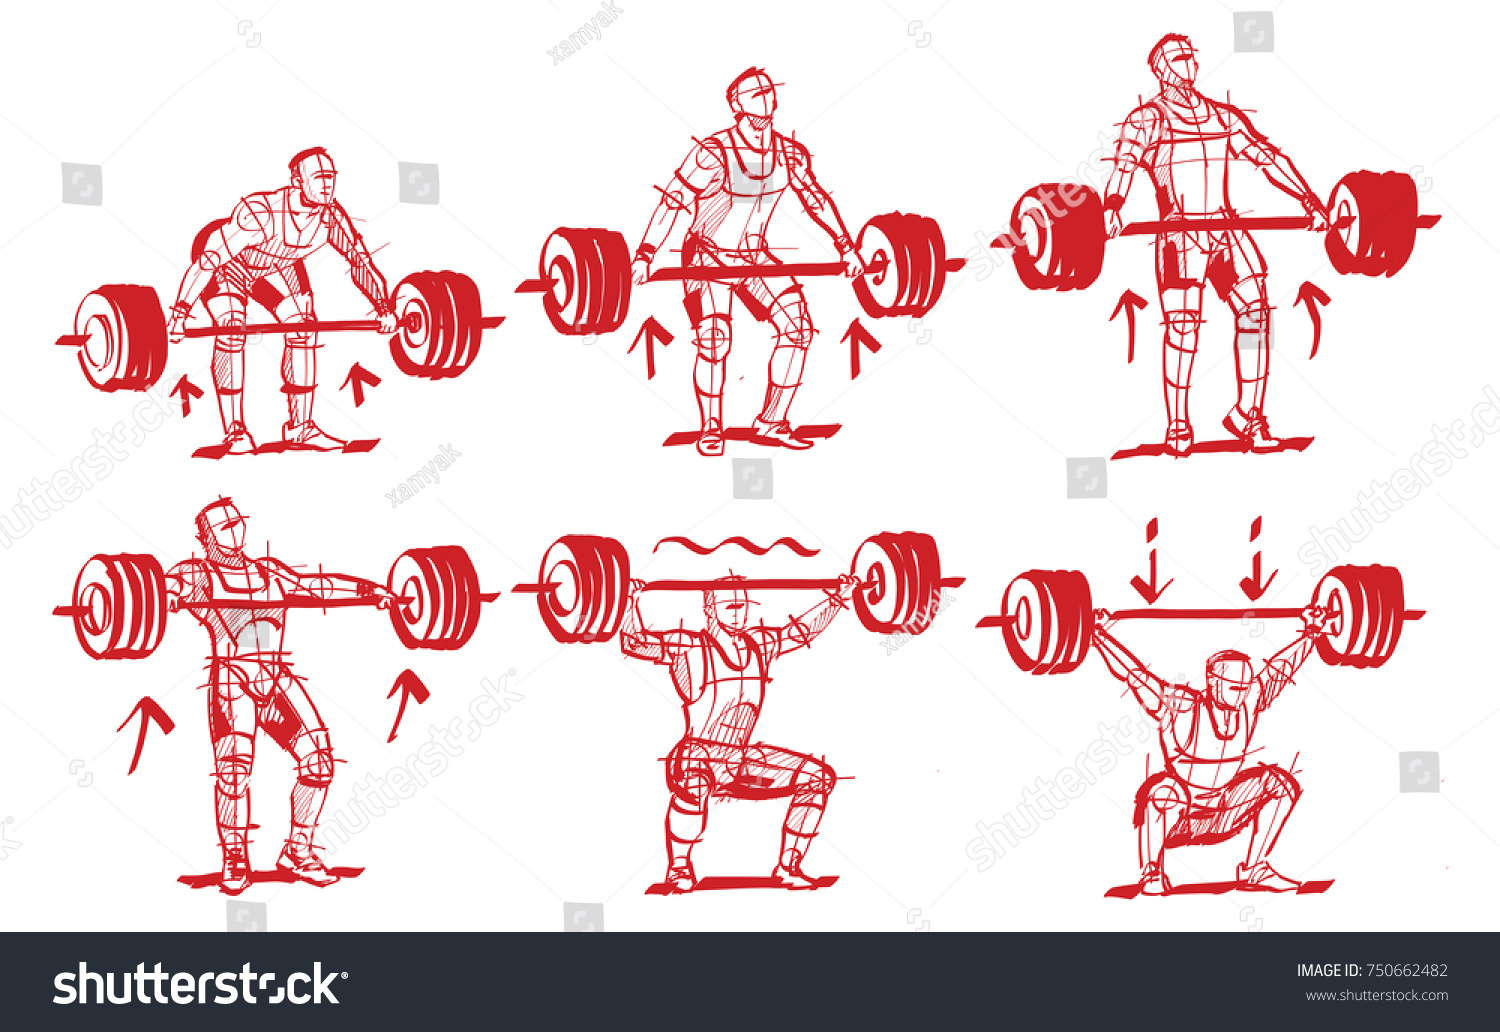 SVG of sketches weightlifter push and pull the bar svg